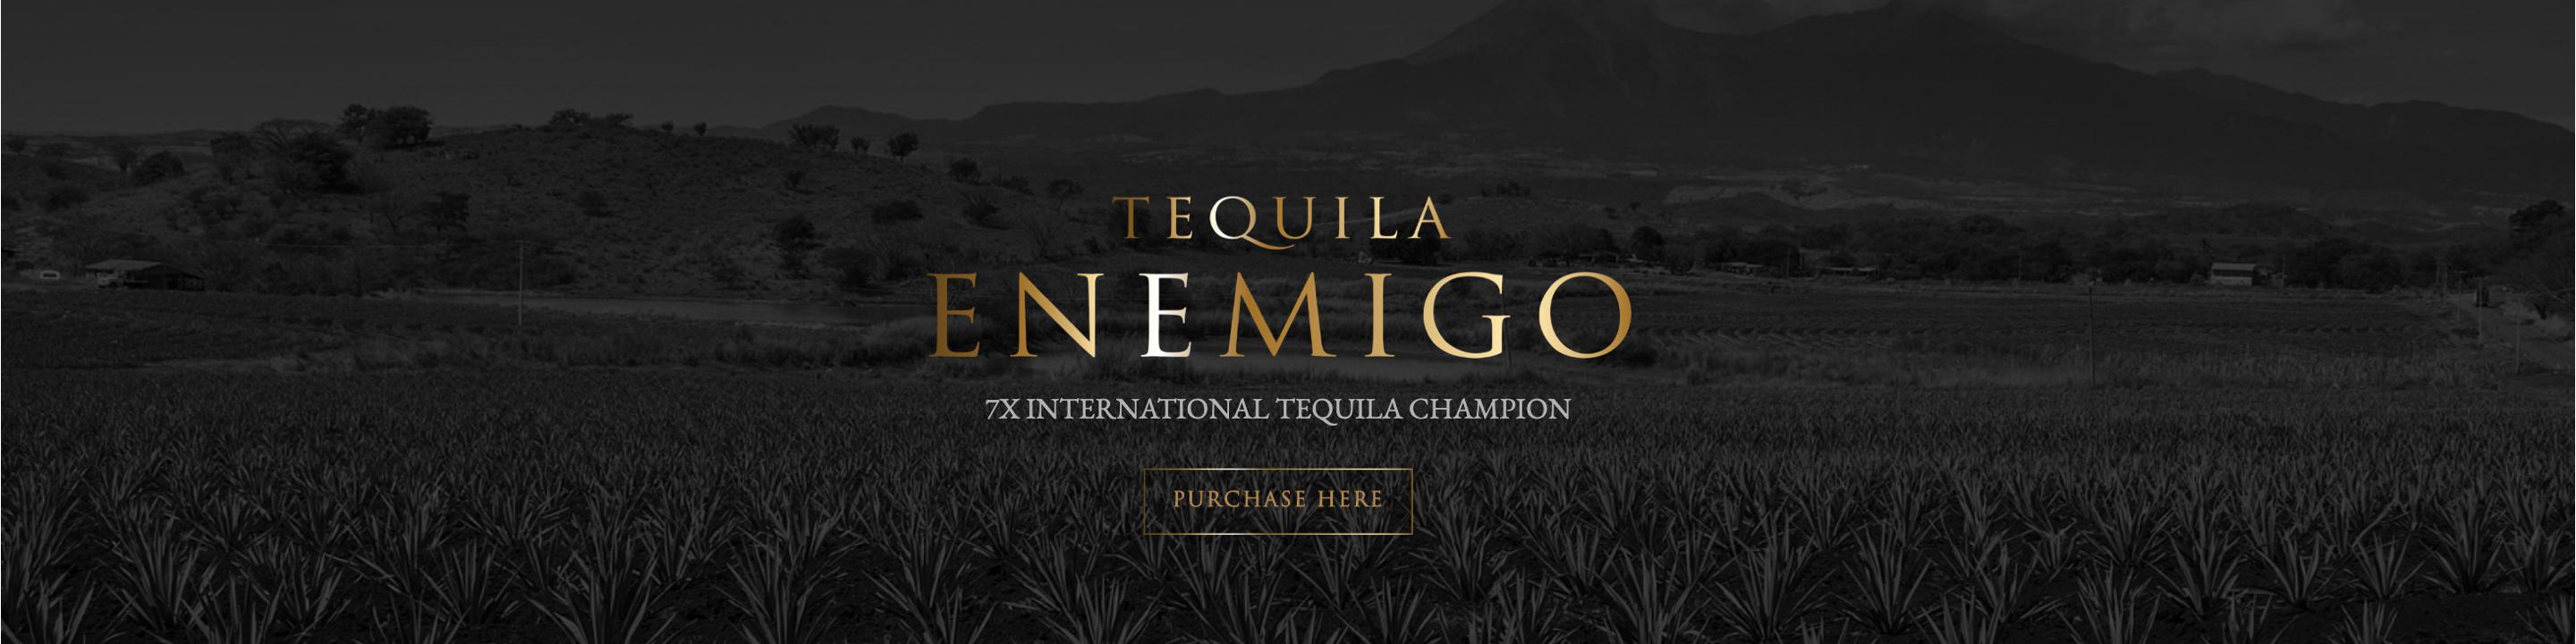 Enemigo’s Tequilas have won 7 Double Gold and Best in Show Awards in less than 18 months, and are now served at some of the finest restaurants in New York, London and coming soon to California including Annabel’s, Del Posto, The Modern, Baccarat Hotel and the Topping Rose to name a few. Enemigo has been featured in Forbes five times, Business Insider, Vogue, and Esquire since launch with the two Tequilas being noted as ‘Revolutionary’. Named Enemigo by the three young founders to be the Enemy of over marketing; letting the liquid, awards and consumers speak for the brand instead of marketing gimmicks. 